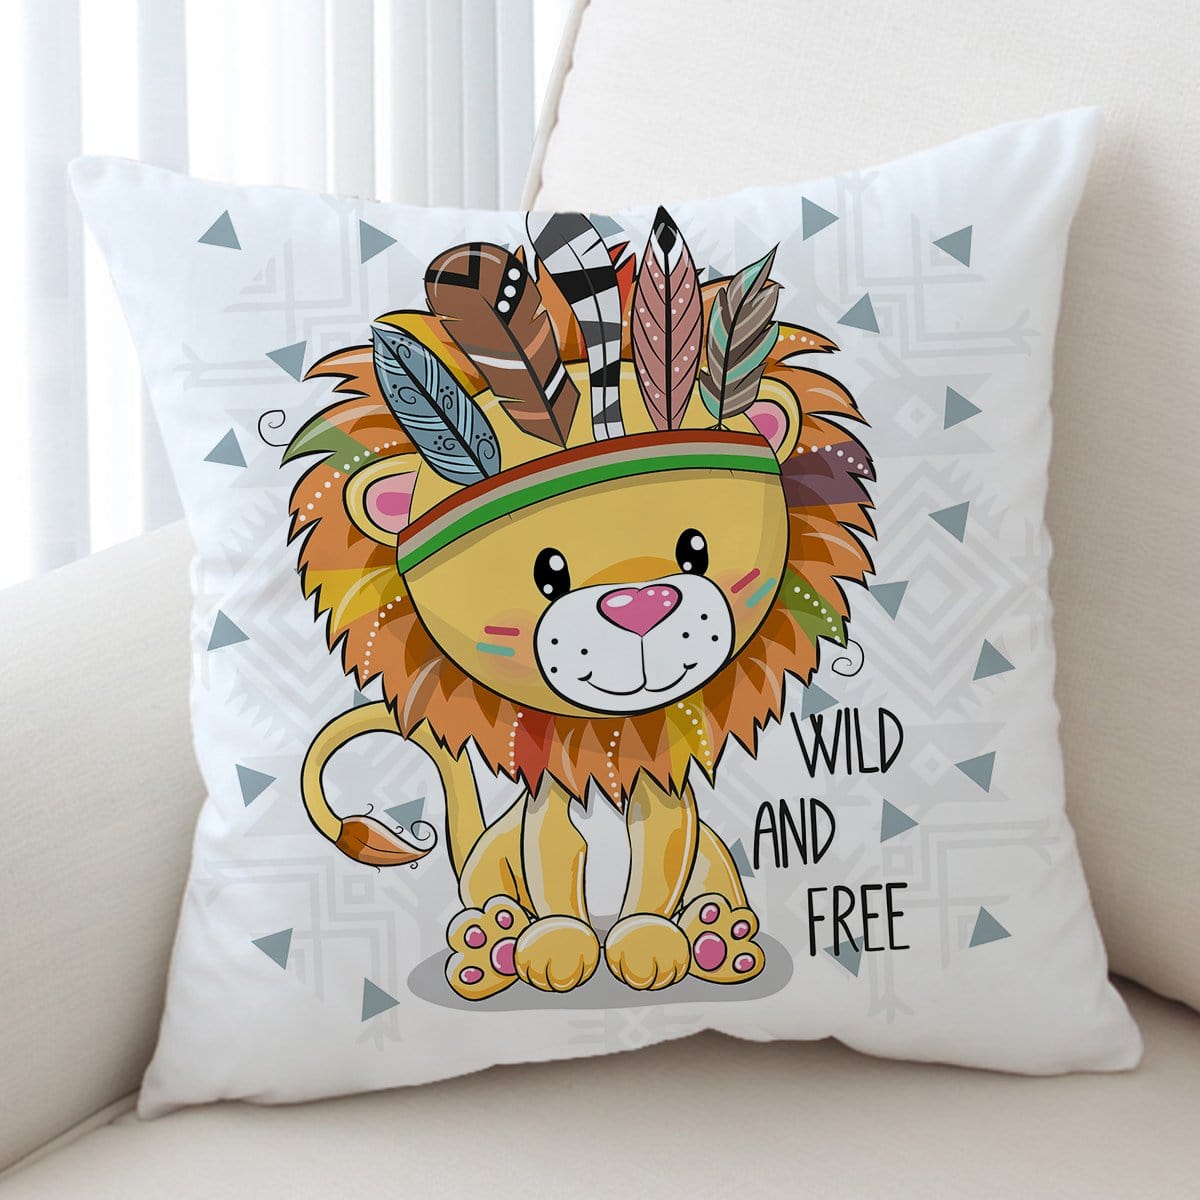 Wild and Free Cub Wild and Free Cub Cushion Cover